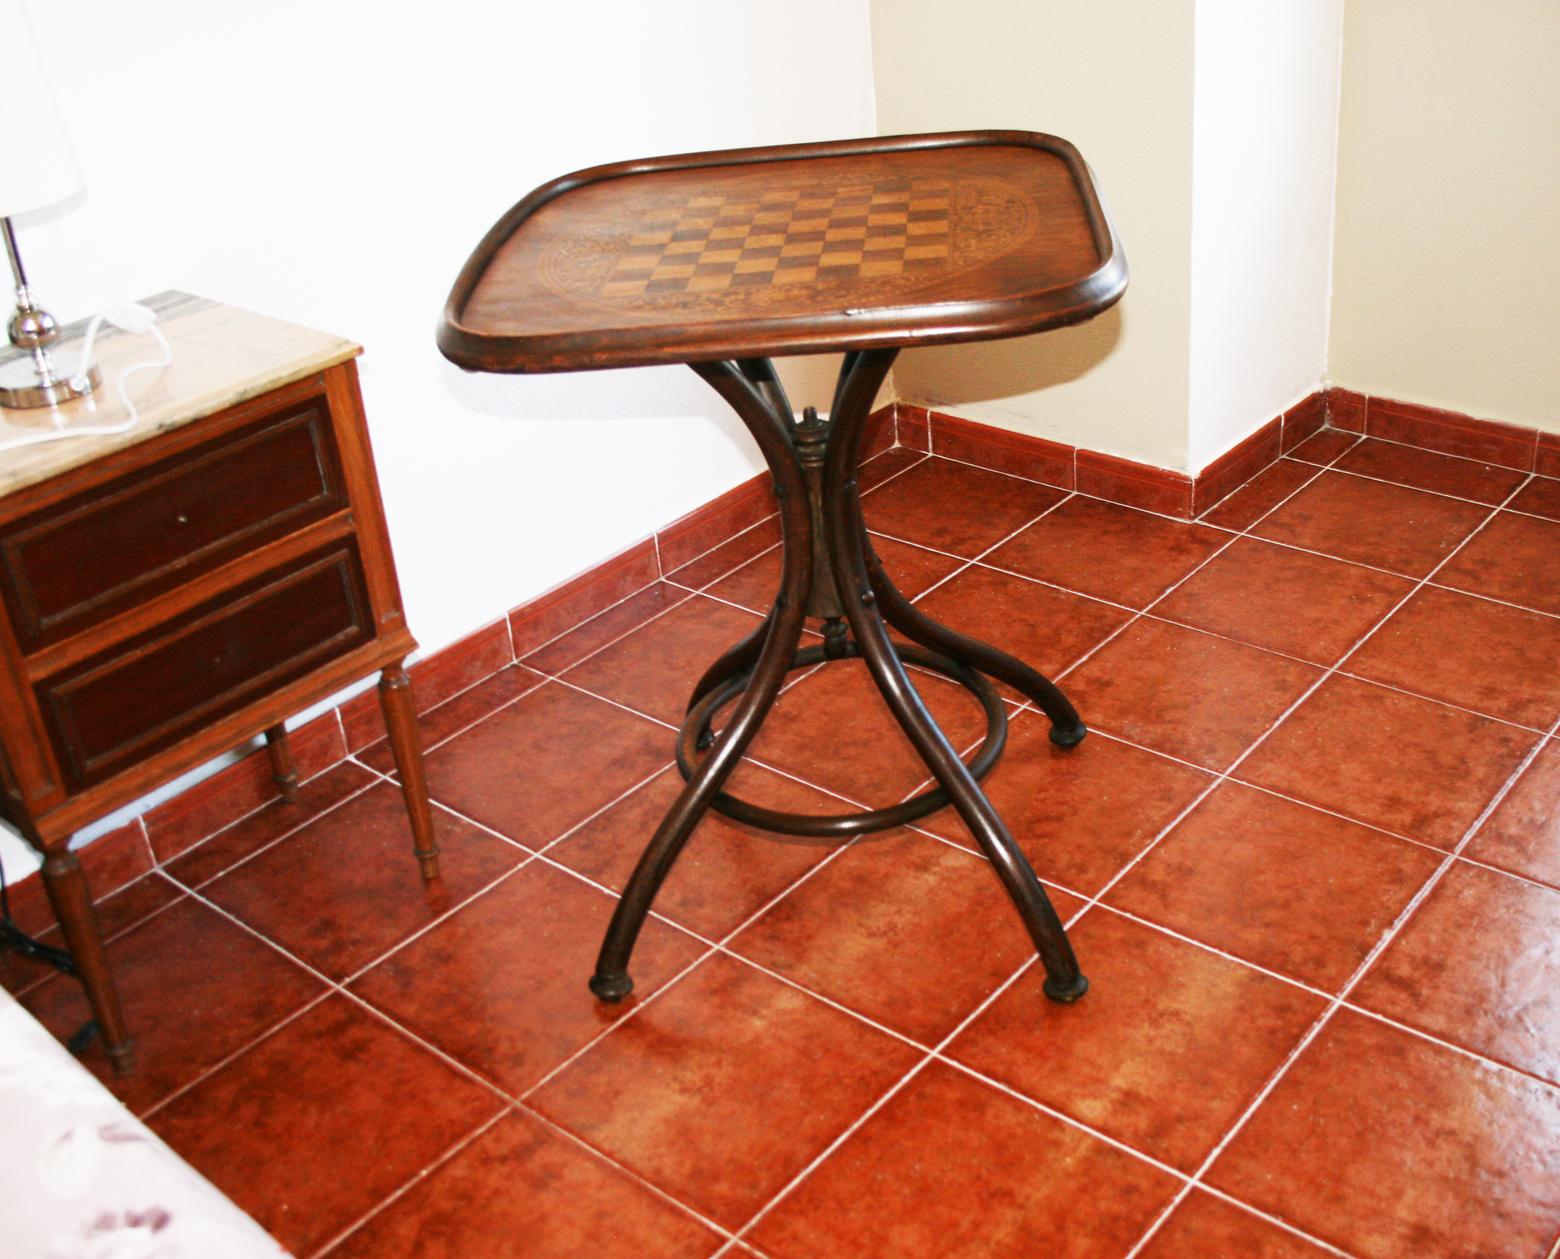 Thonet Style Bentwood Game Table, Late 19th Century or Early 20th Century 13